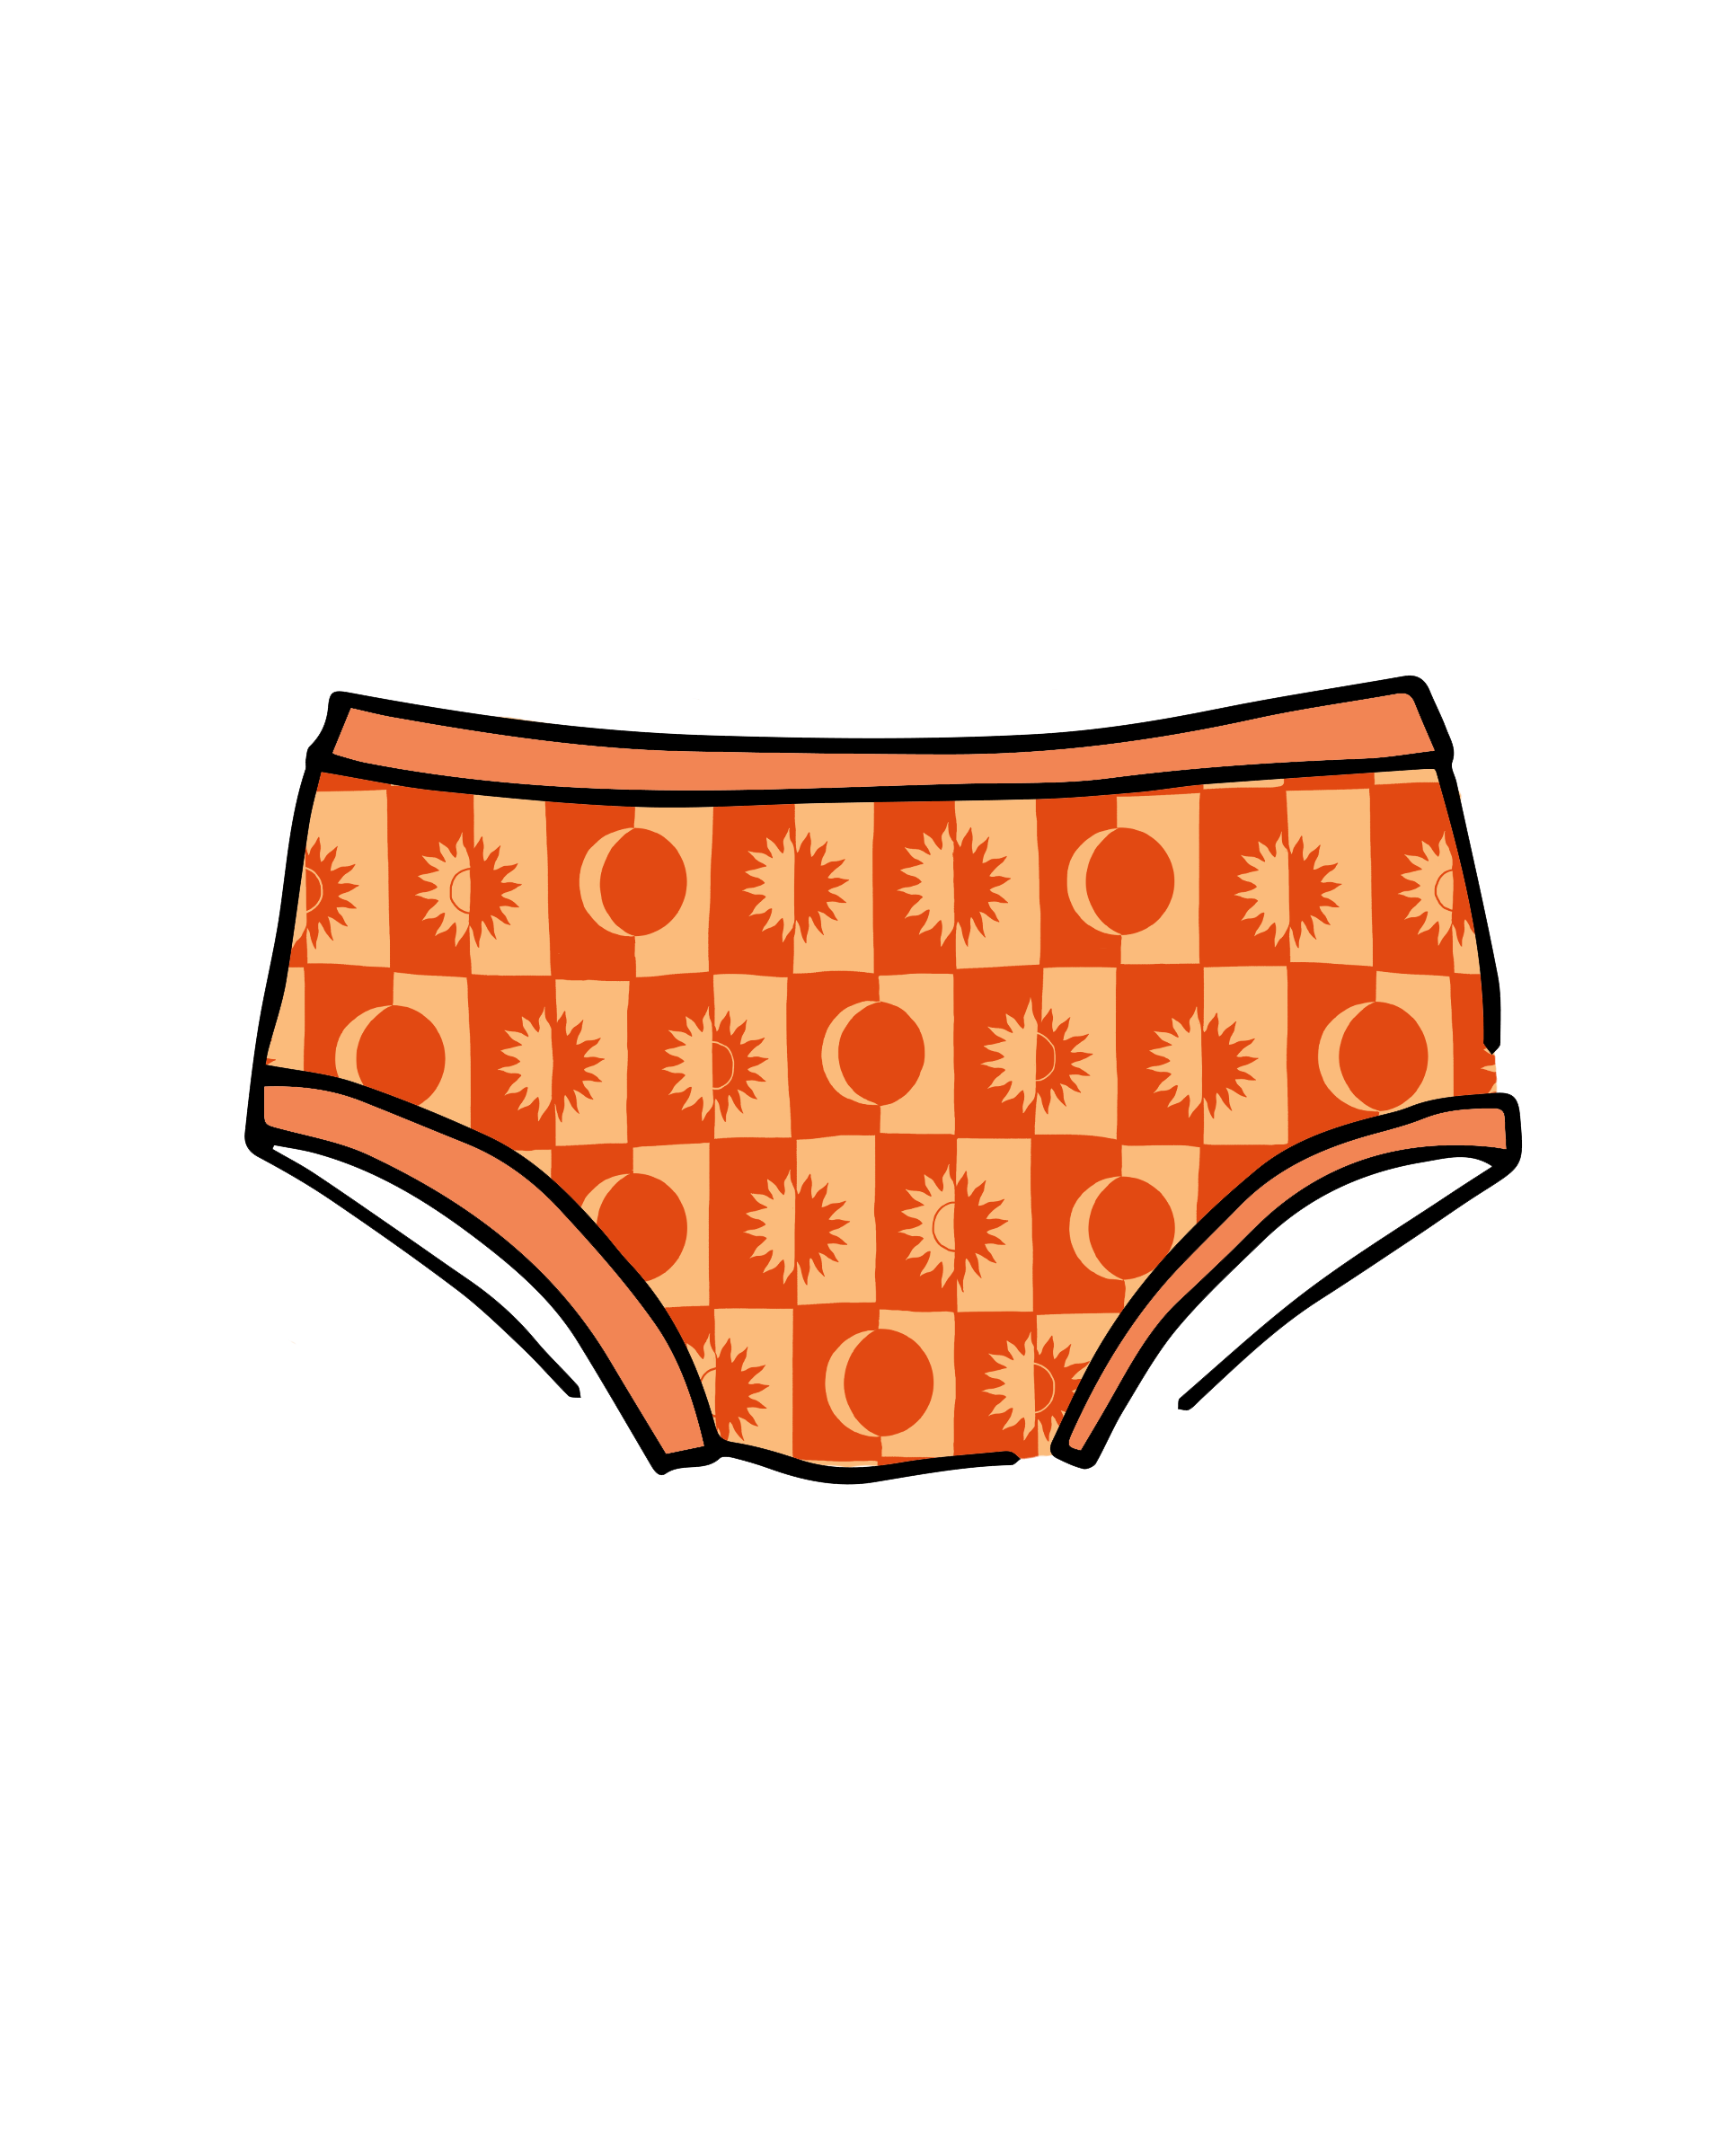 Drawing of Thunderpants Kids underwear in Autumn Equinox print.